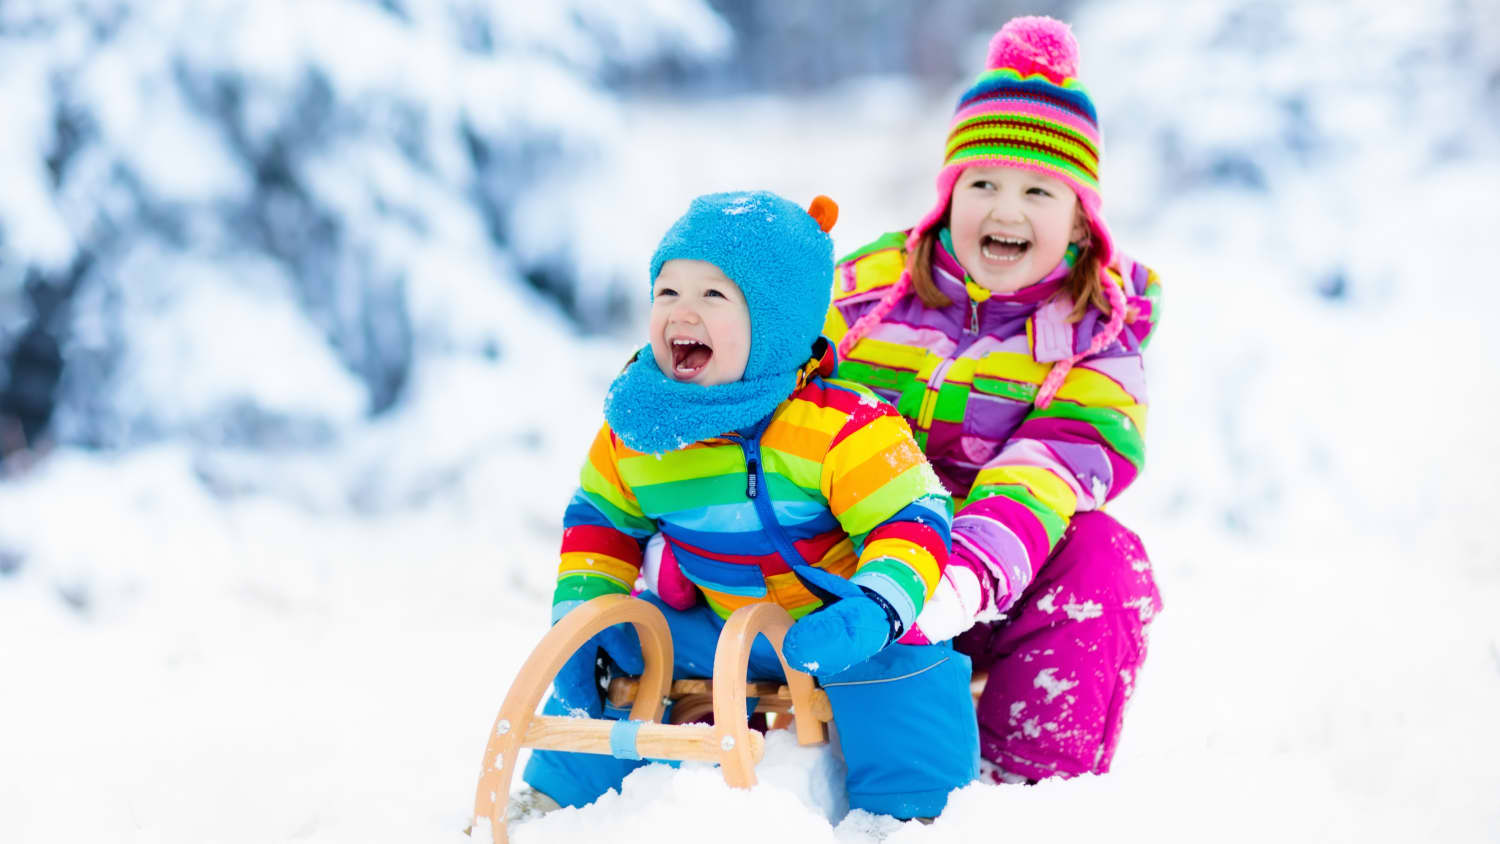 Two children are sledding while wearing colorful outerwear.